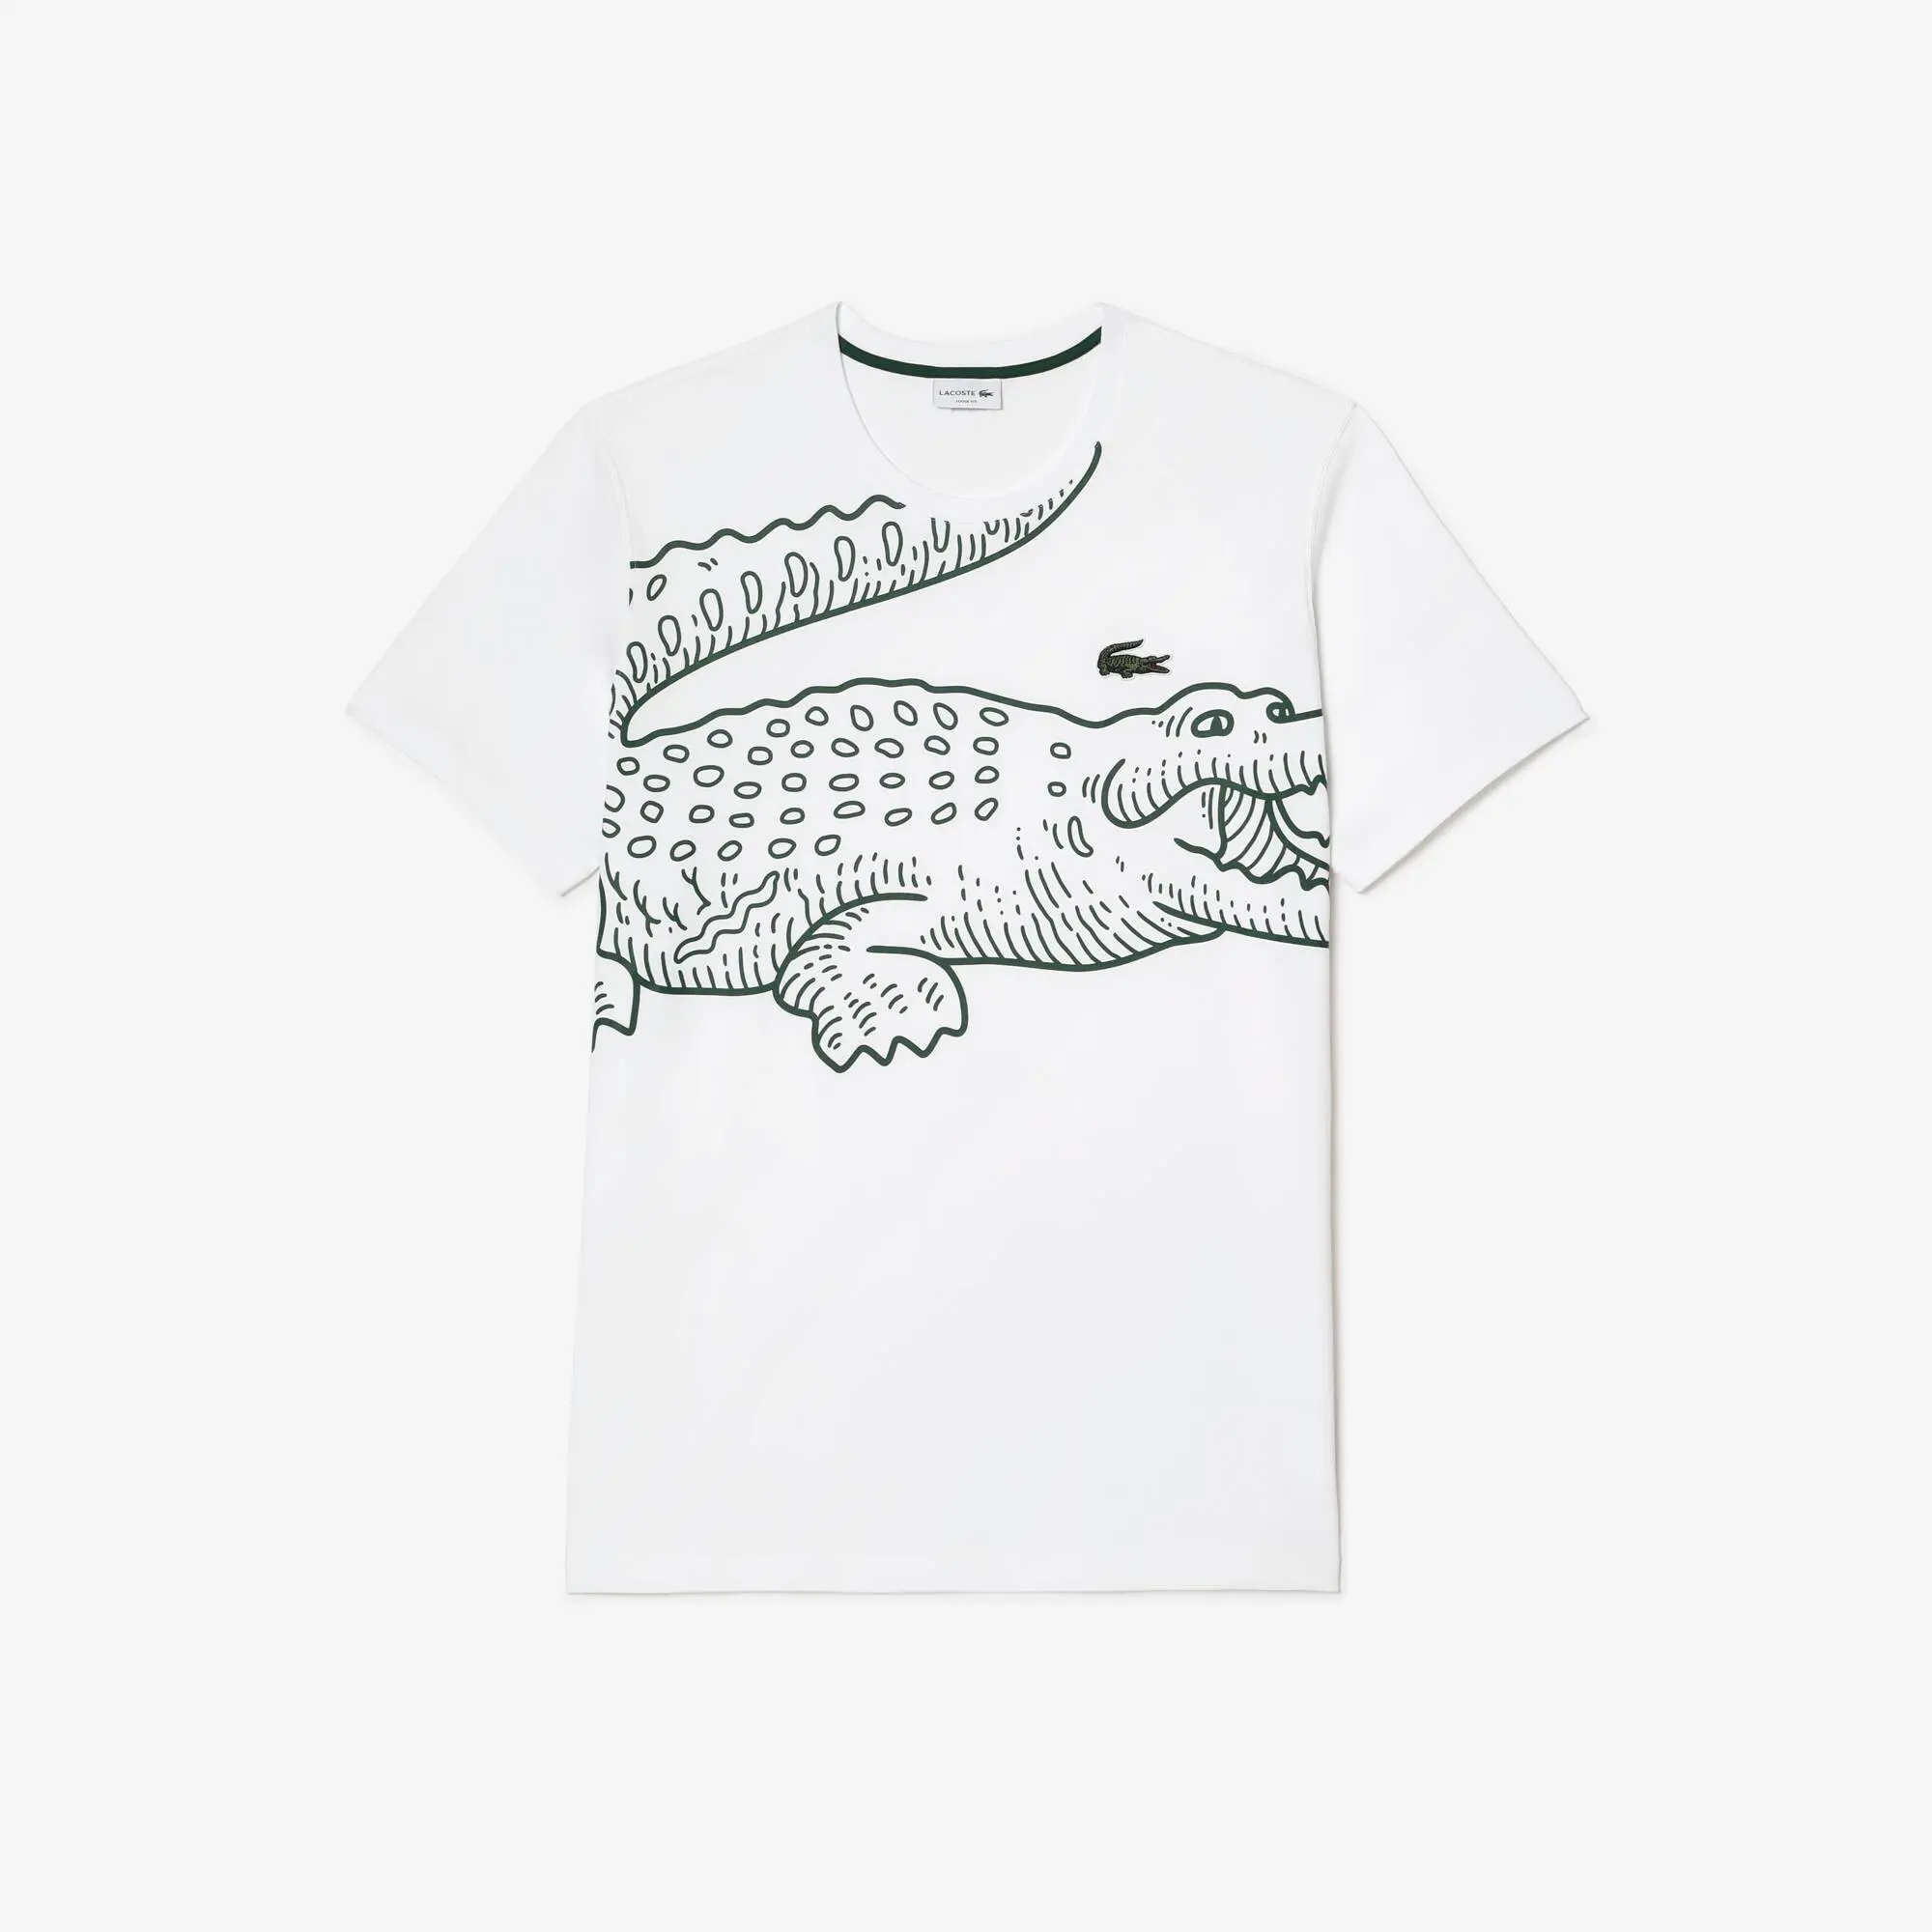 Lacoste T-shirt homme loose fit coton - Grande taille - Tall. 1